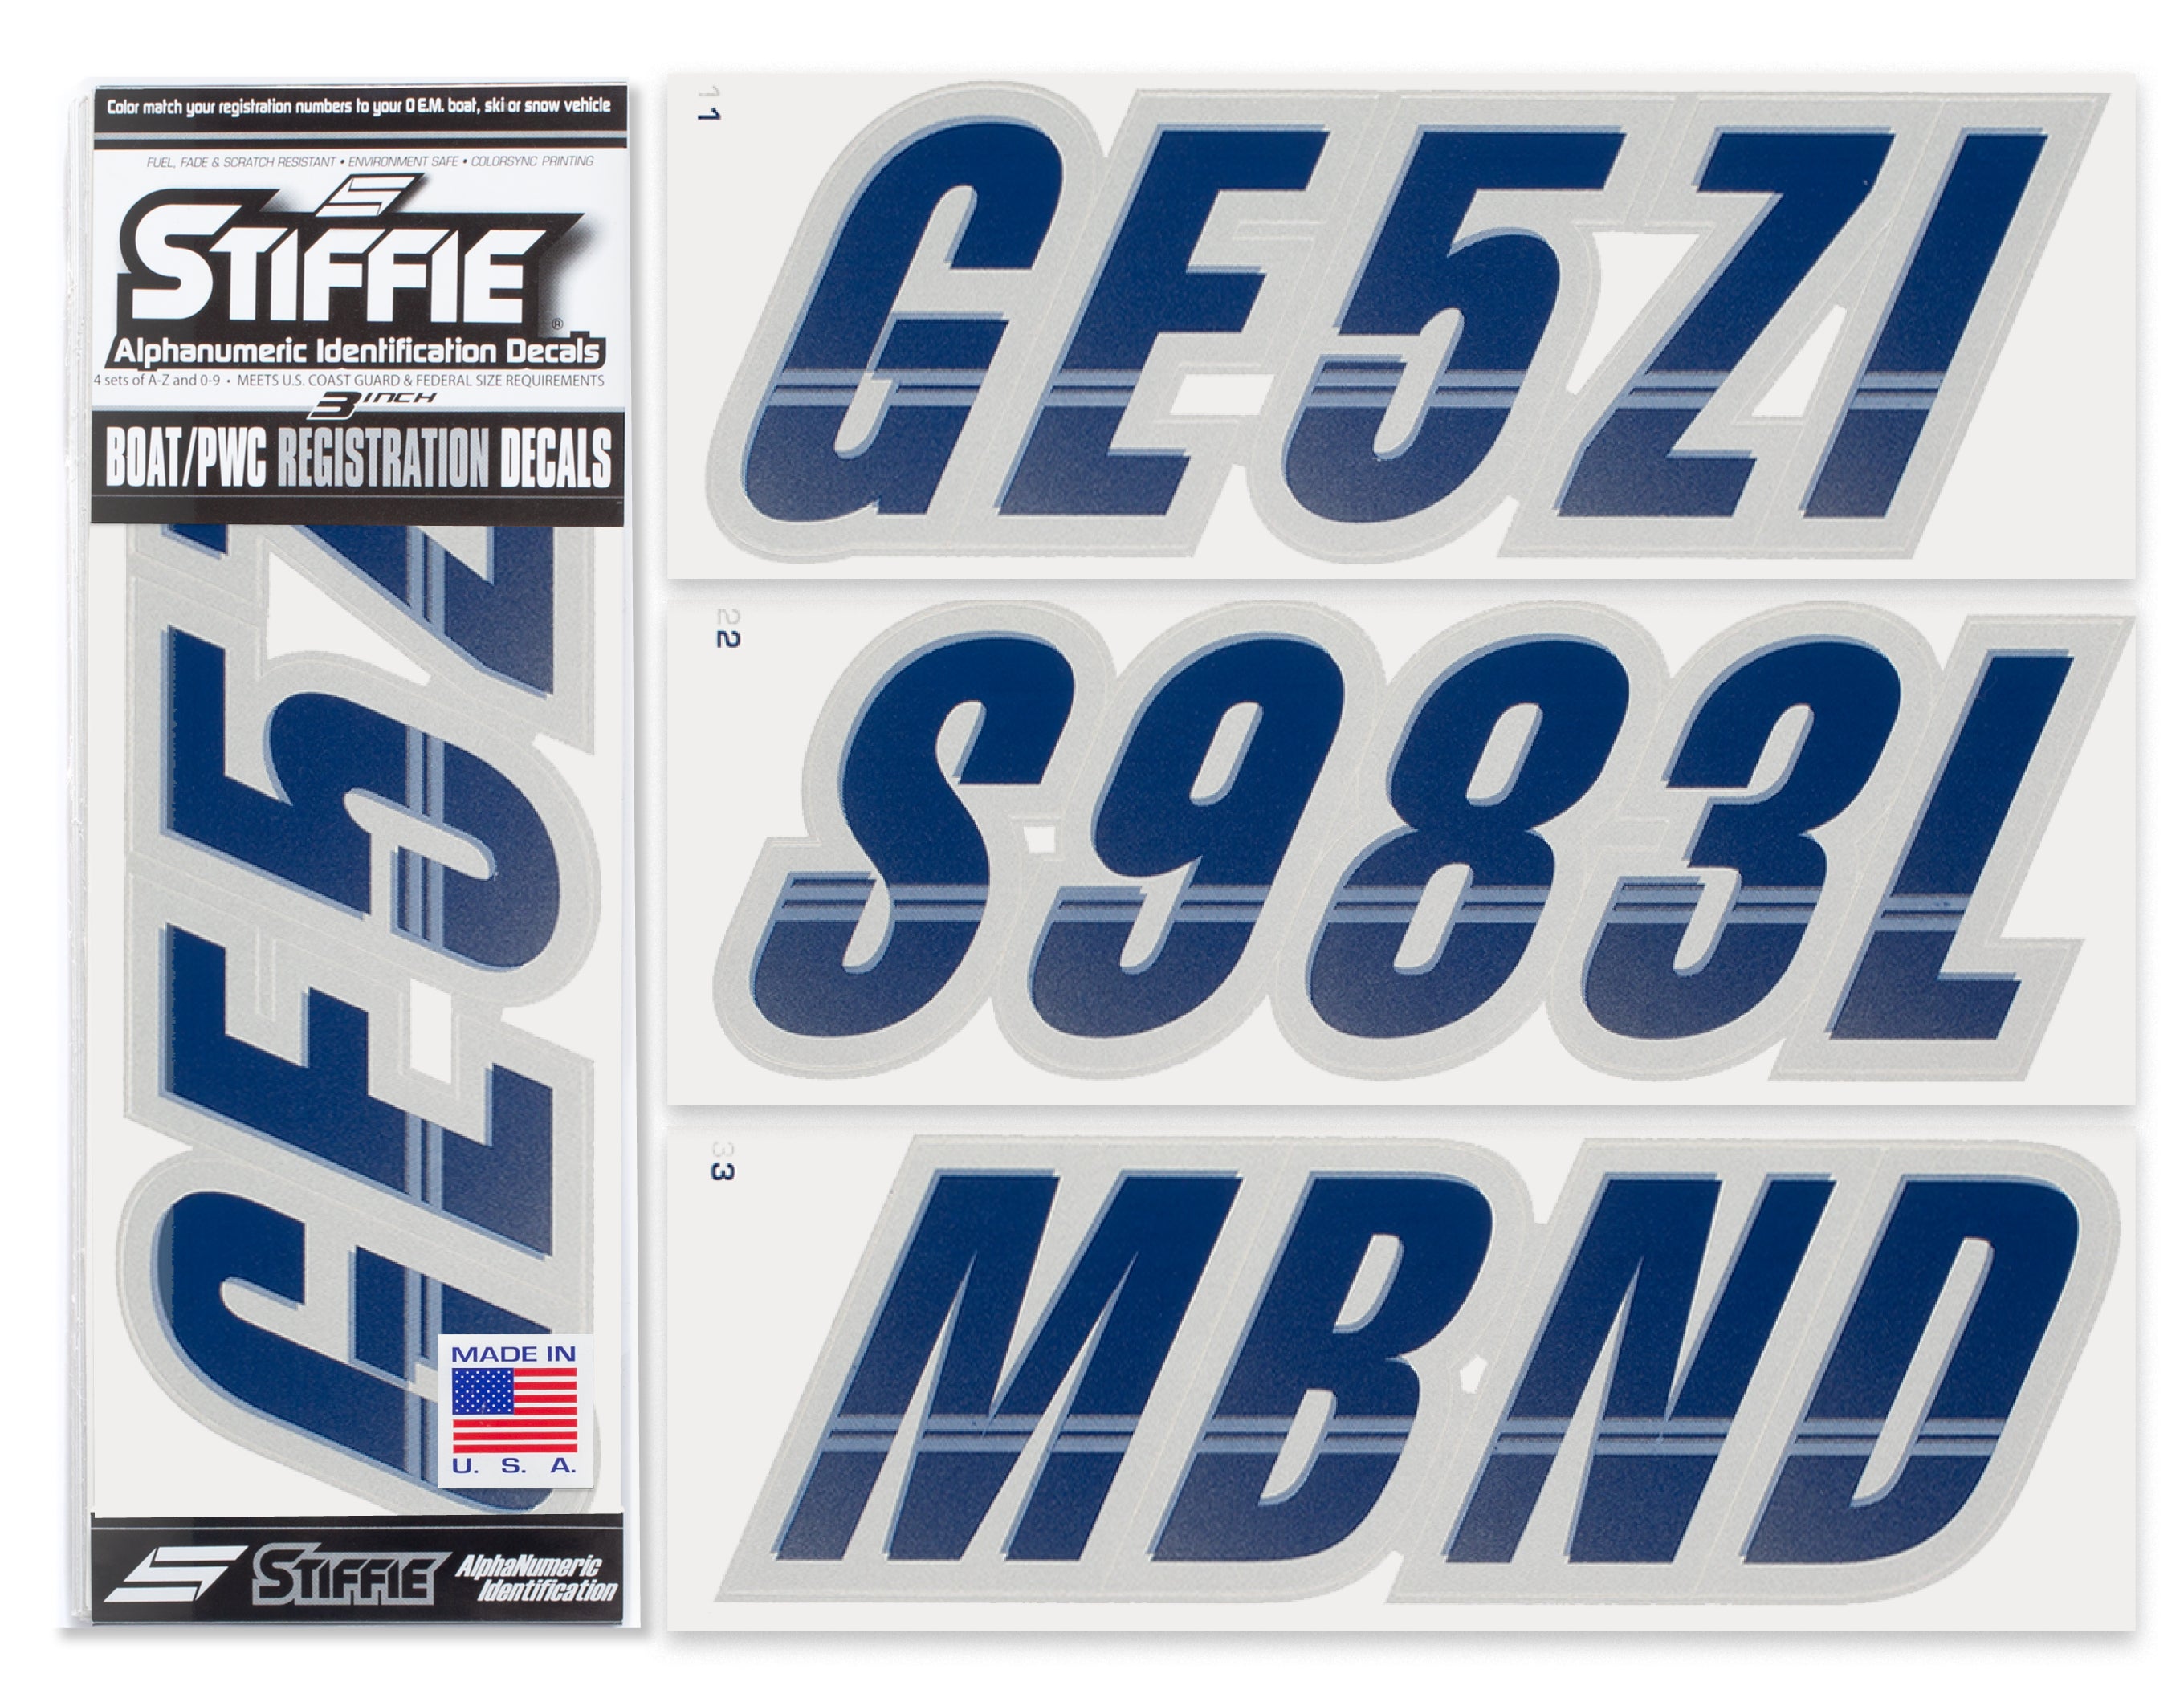 Stiffie Techtron Navy/Silver 3" Alpha-Numeric Registration Identification Numbers Stickers Decals for Boats & Personal Watercraft